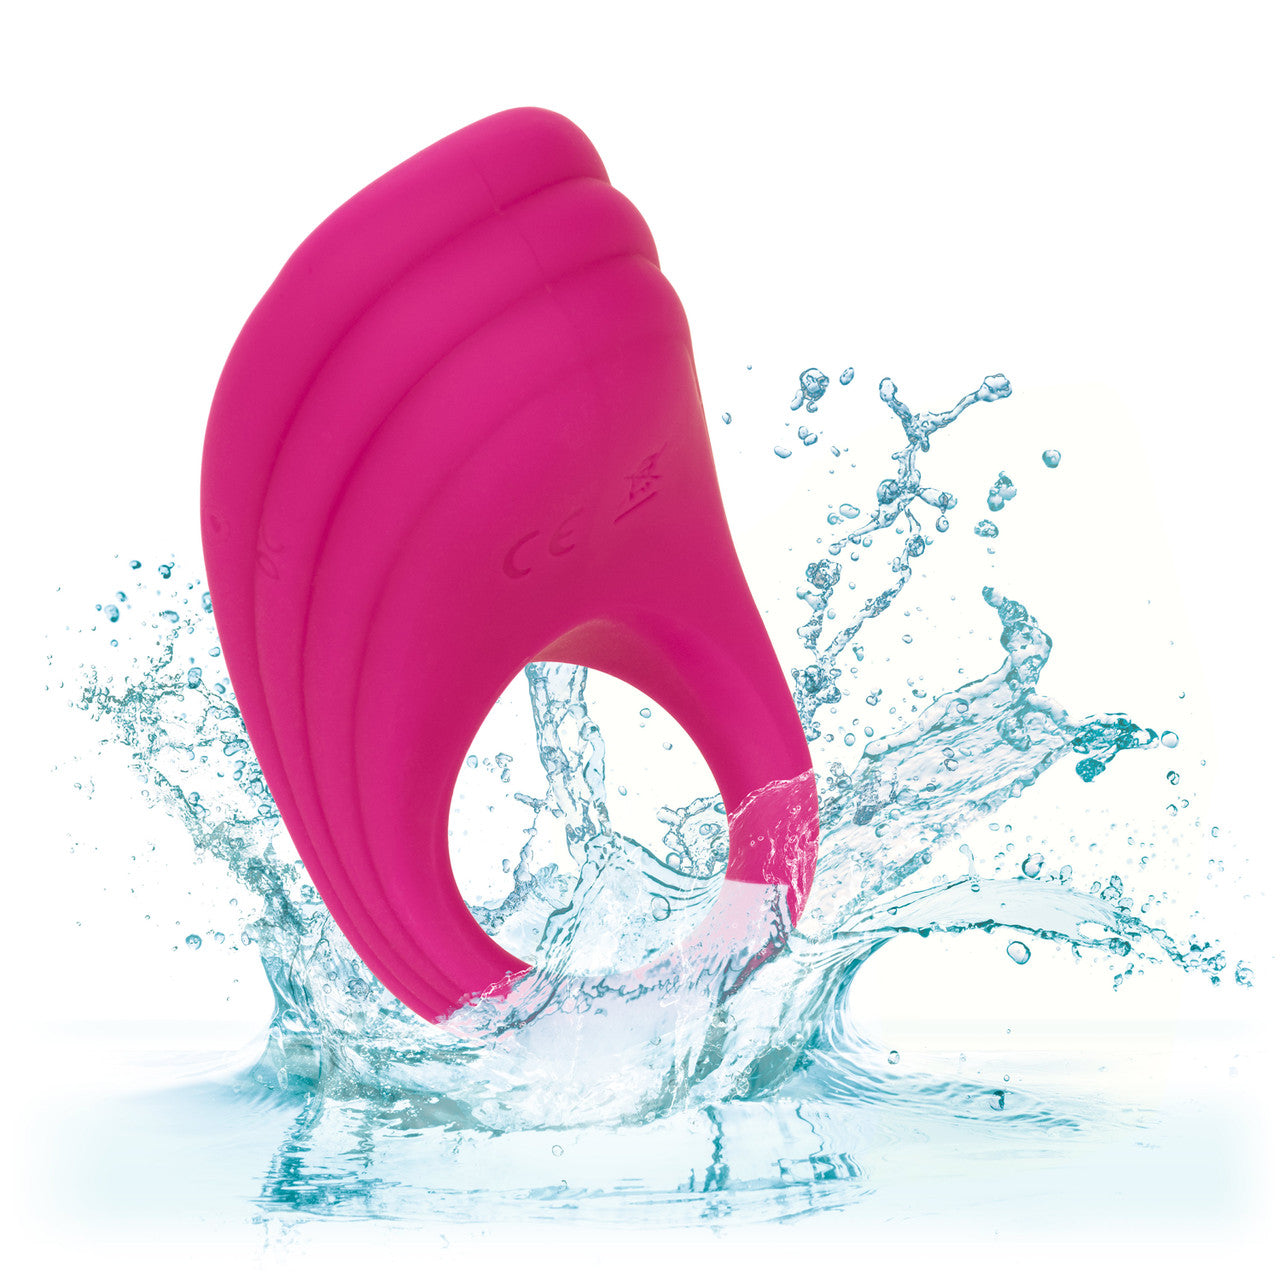 Silicone Remote Pleasure Ring - Thorn & Feather Sex Toy Canada